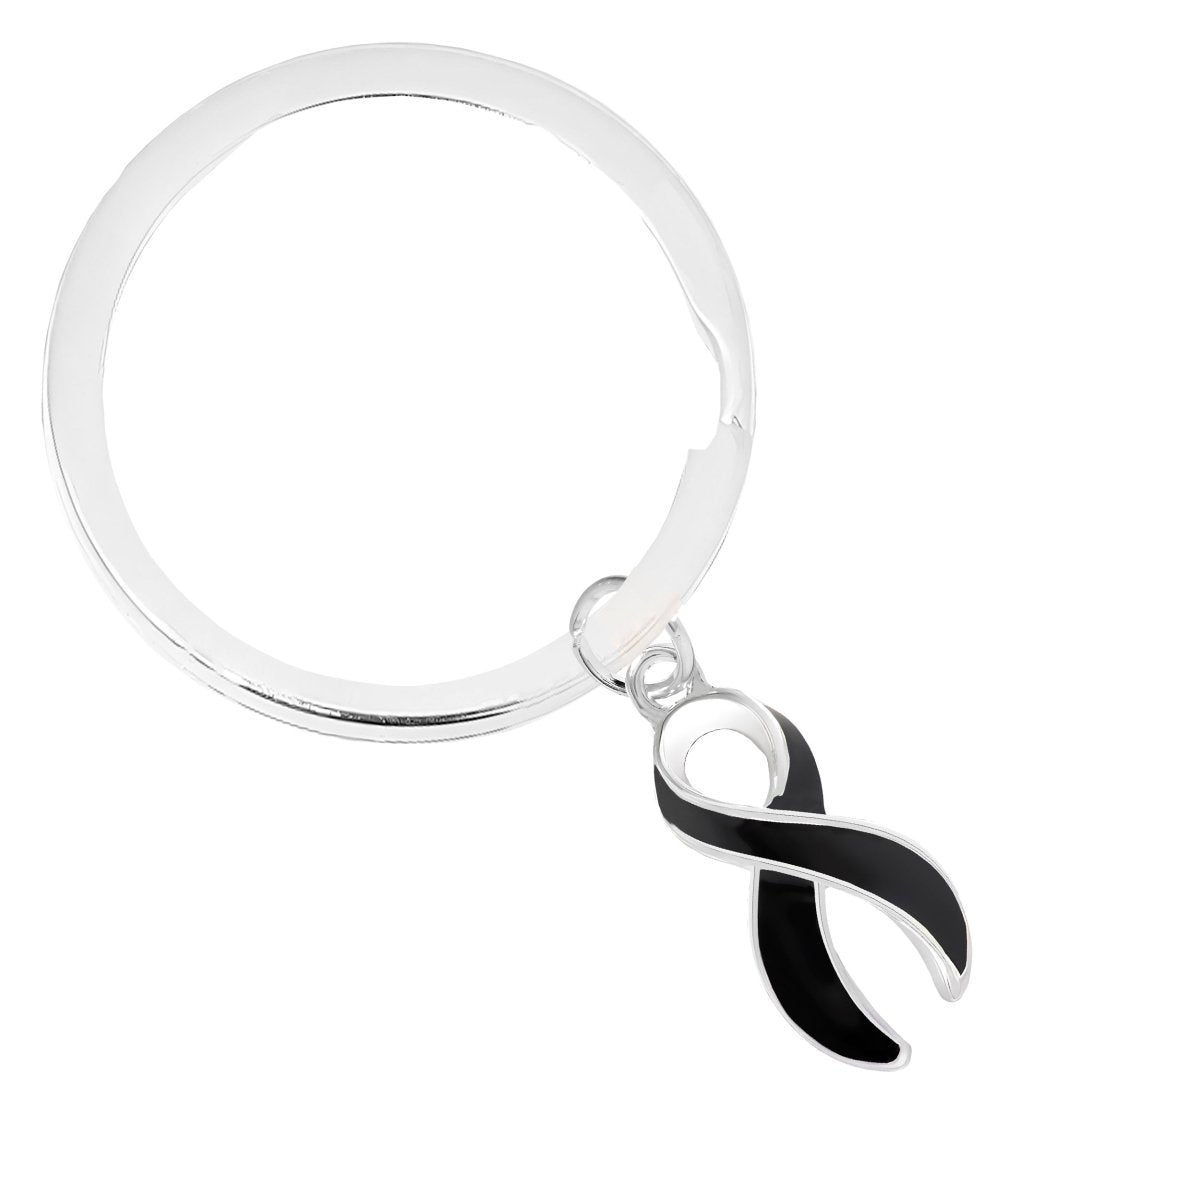 Black Ribbon Split Style Key Chains - Fundraising For A Cause